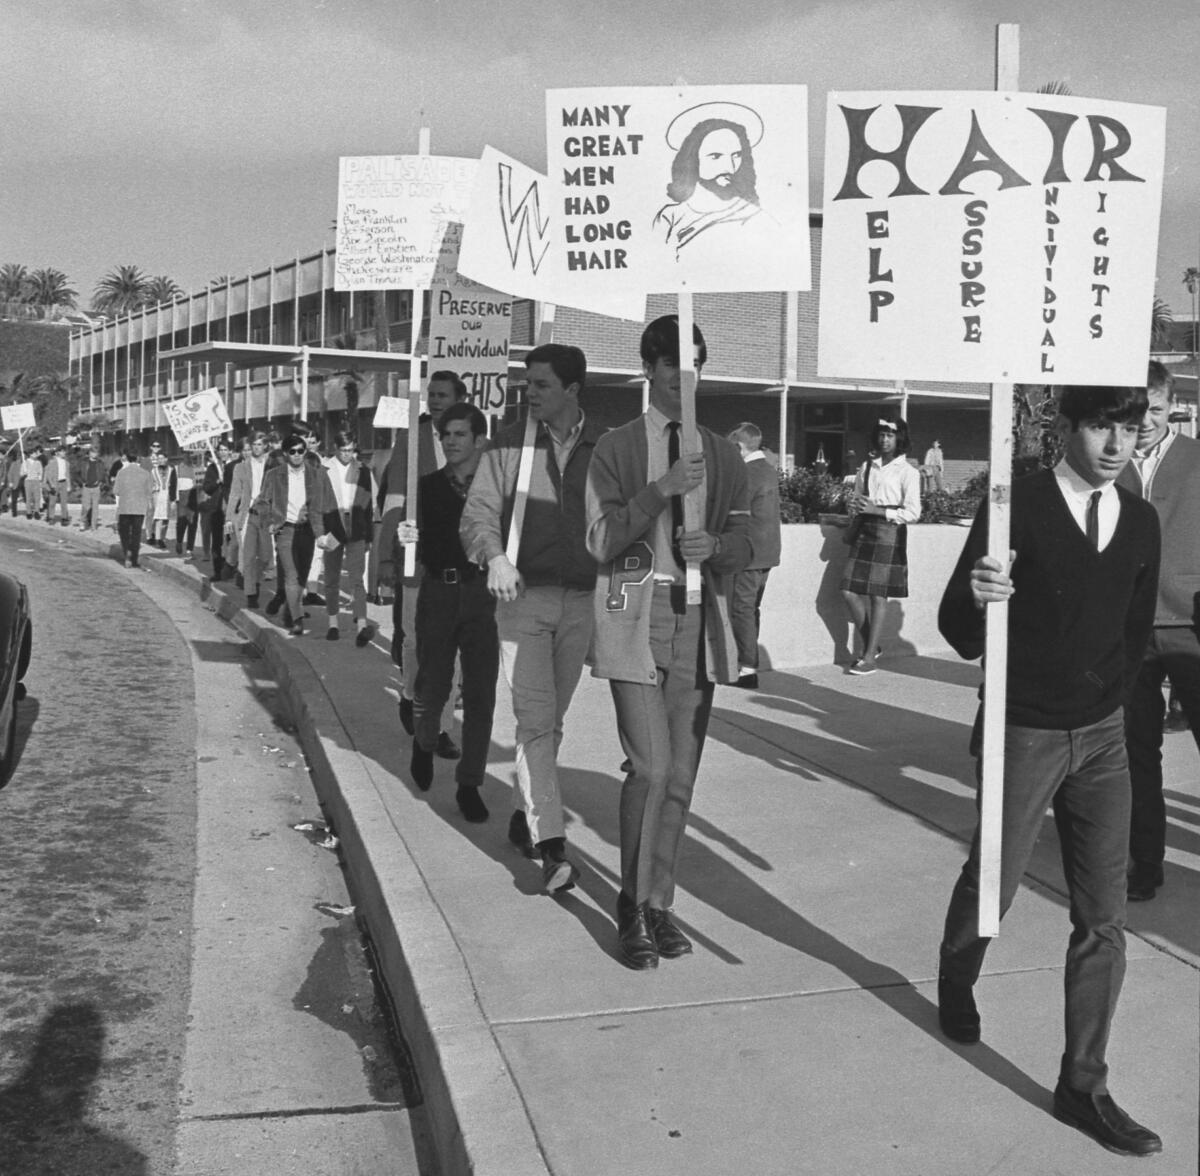 Young people carrying signs walk in line along a sidewalk.